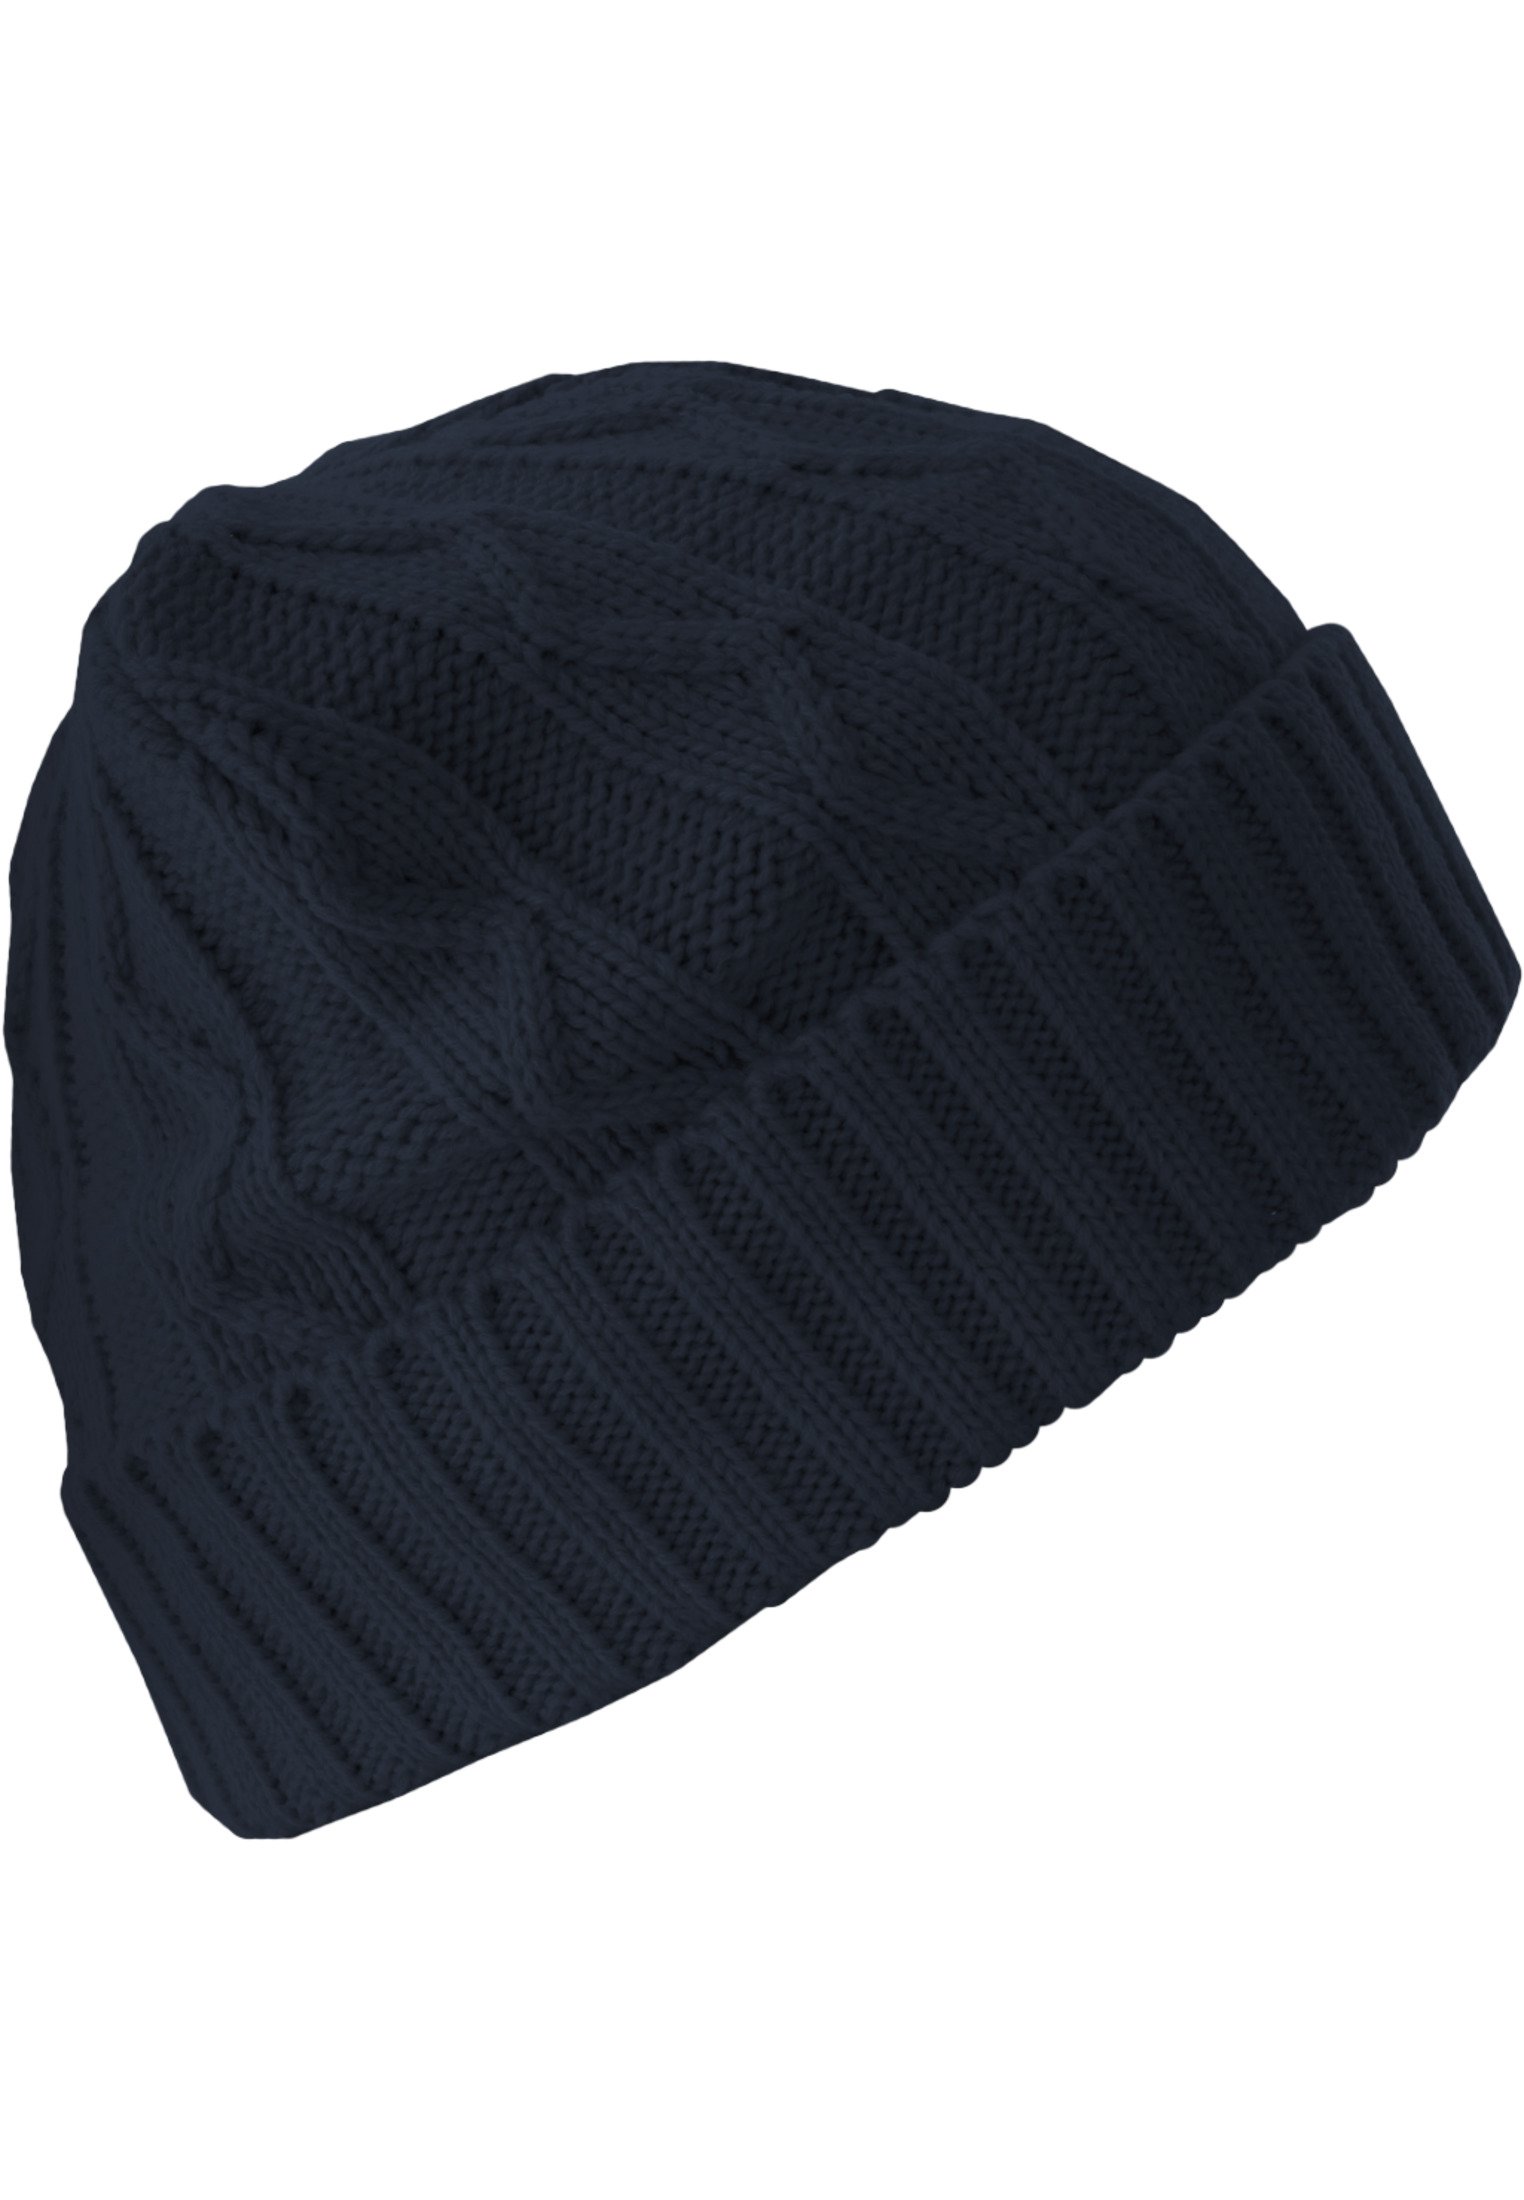 Beanie Cable Flap navy one size